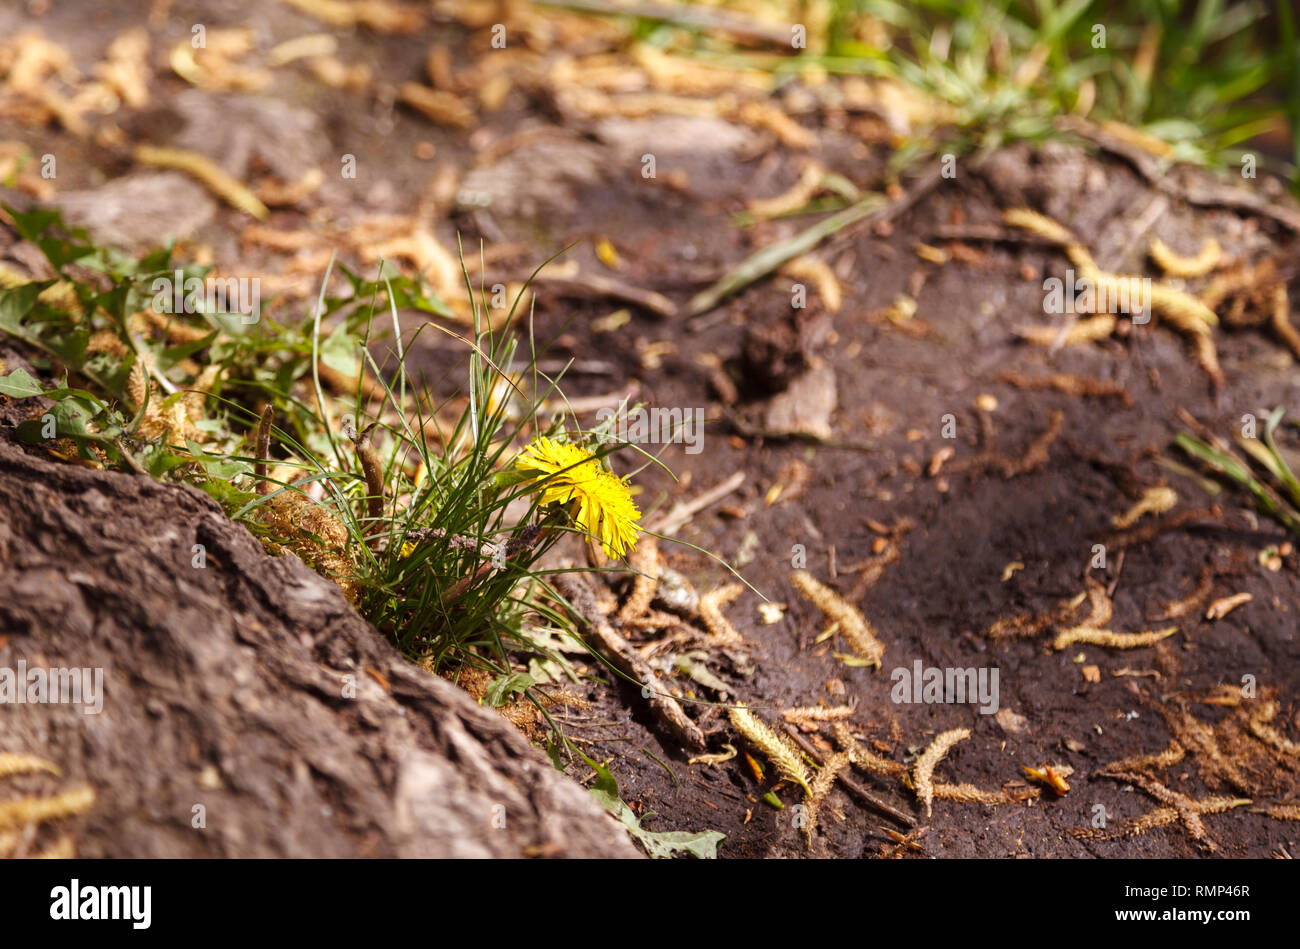 Yellow dandelion in a field of green grass. Dandelion in the foreground in focus with blur background Stock Photo